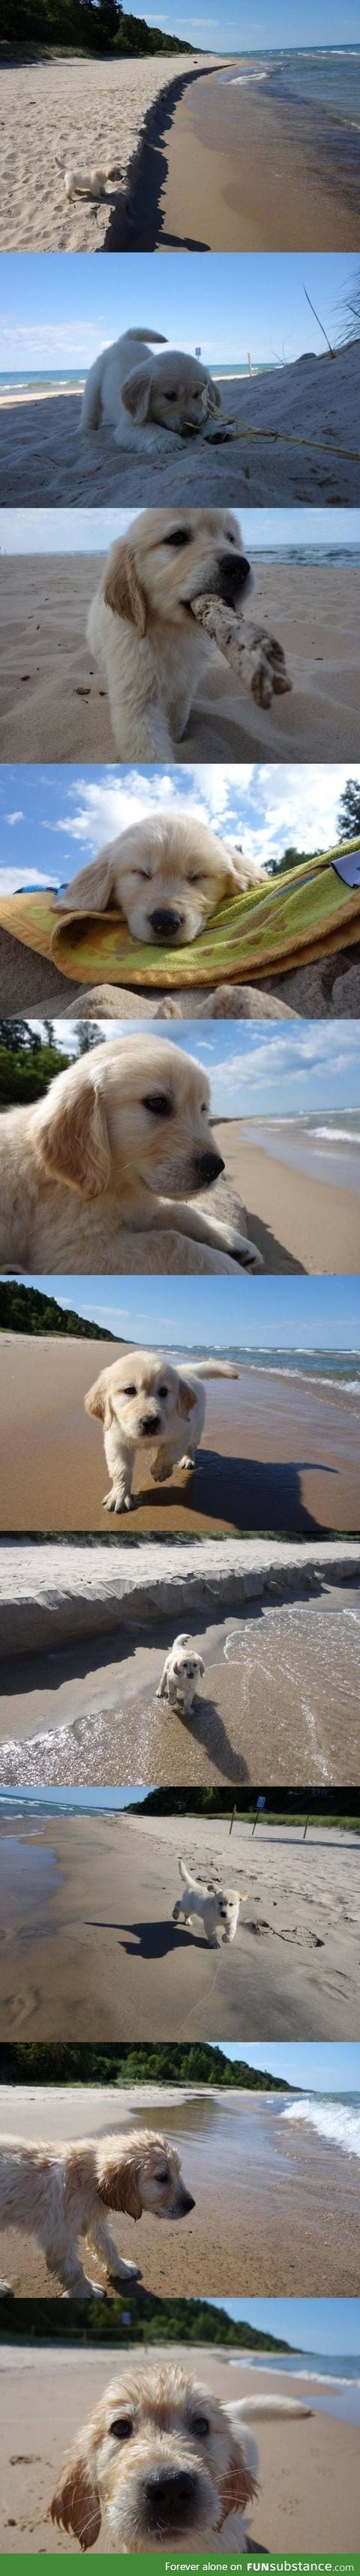 First trip to the beach? That's golden!